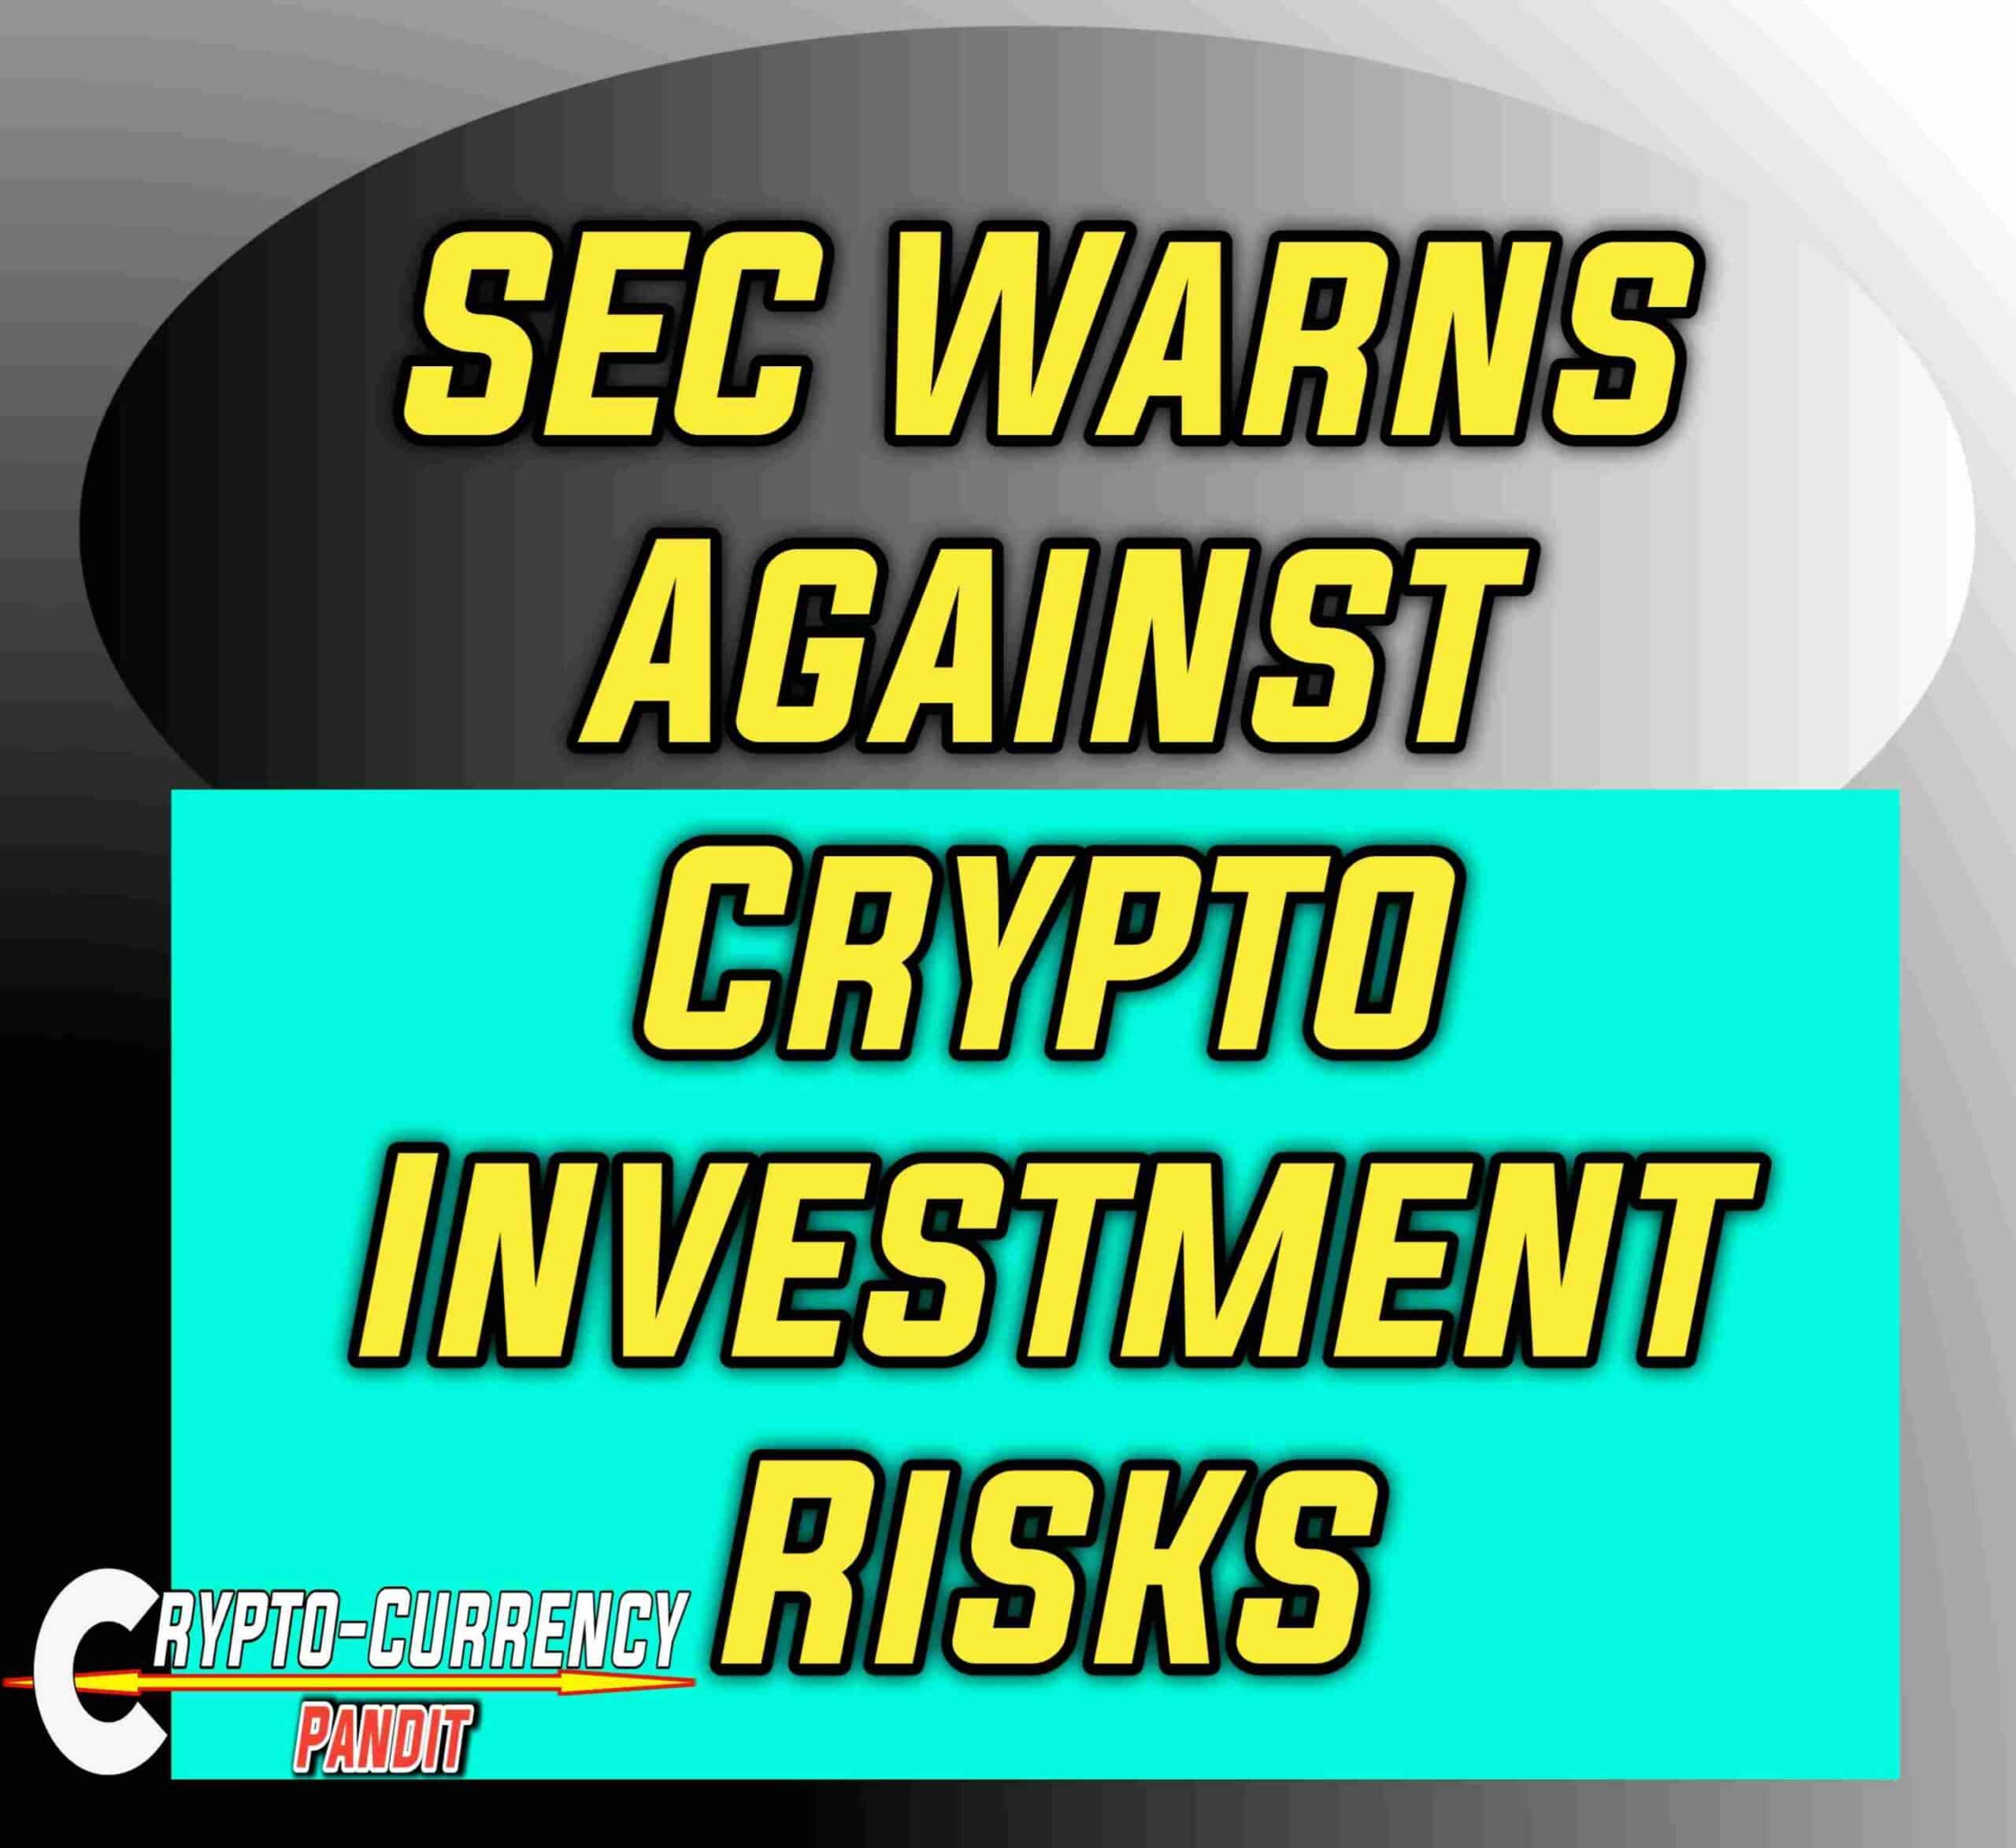 SEC Warns Against Crypto Investment Risks, Read Why